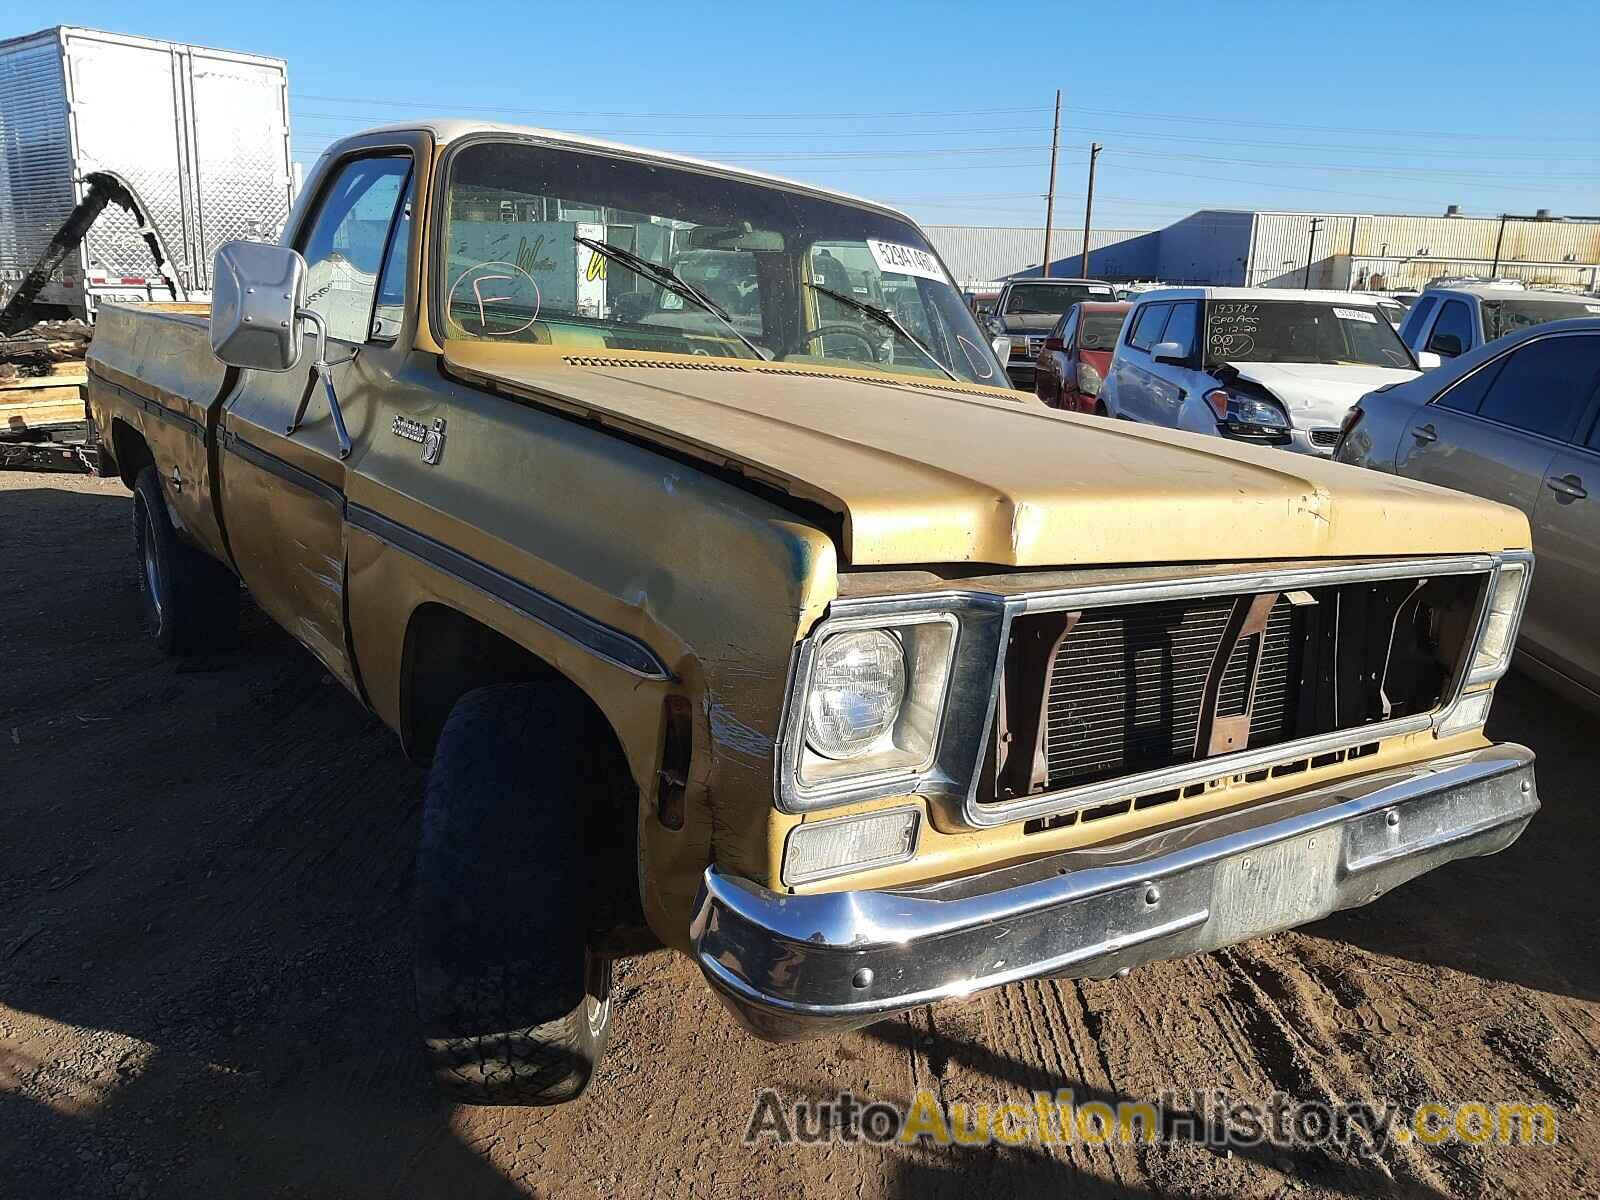 1976 CHEVROLET ALL OTHER, CKU146F376744